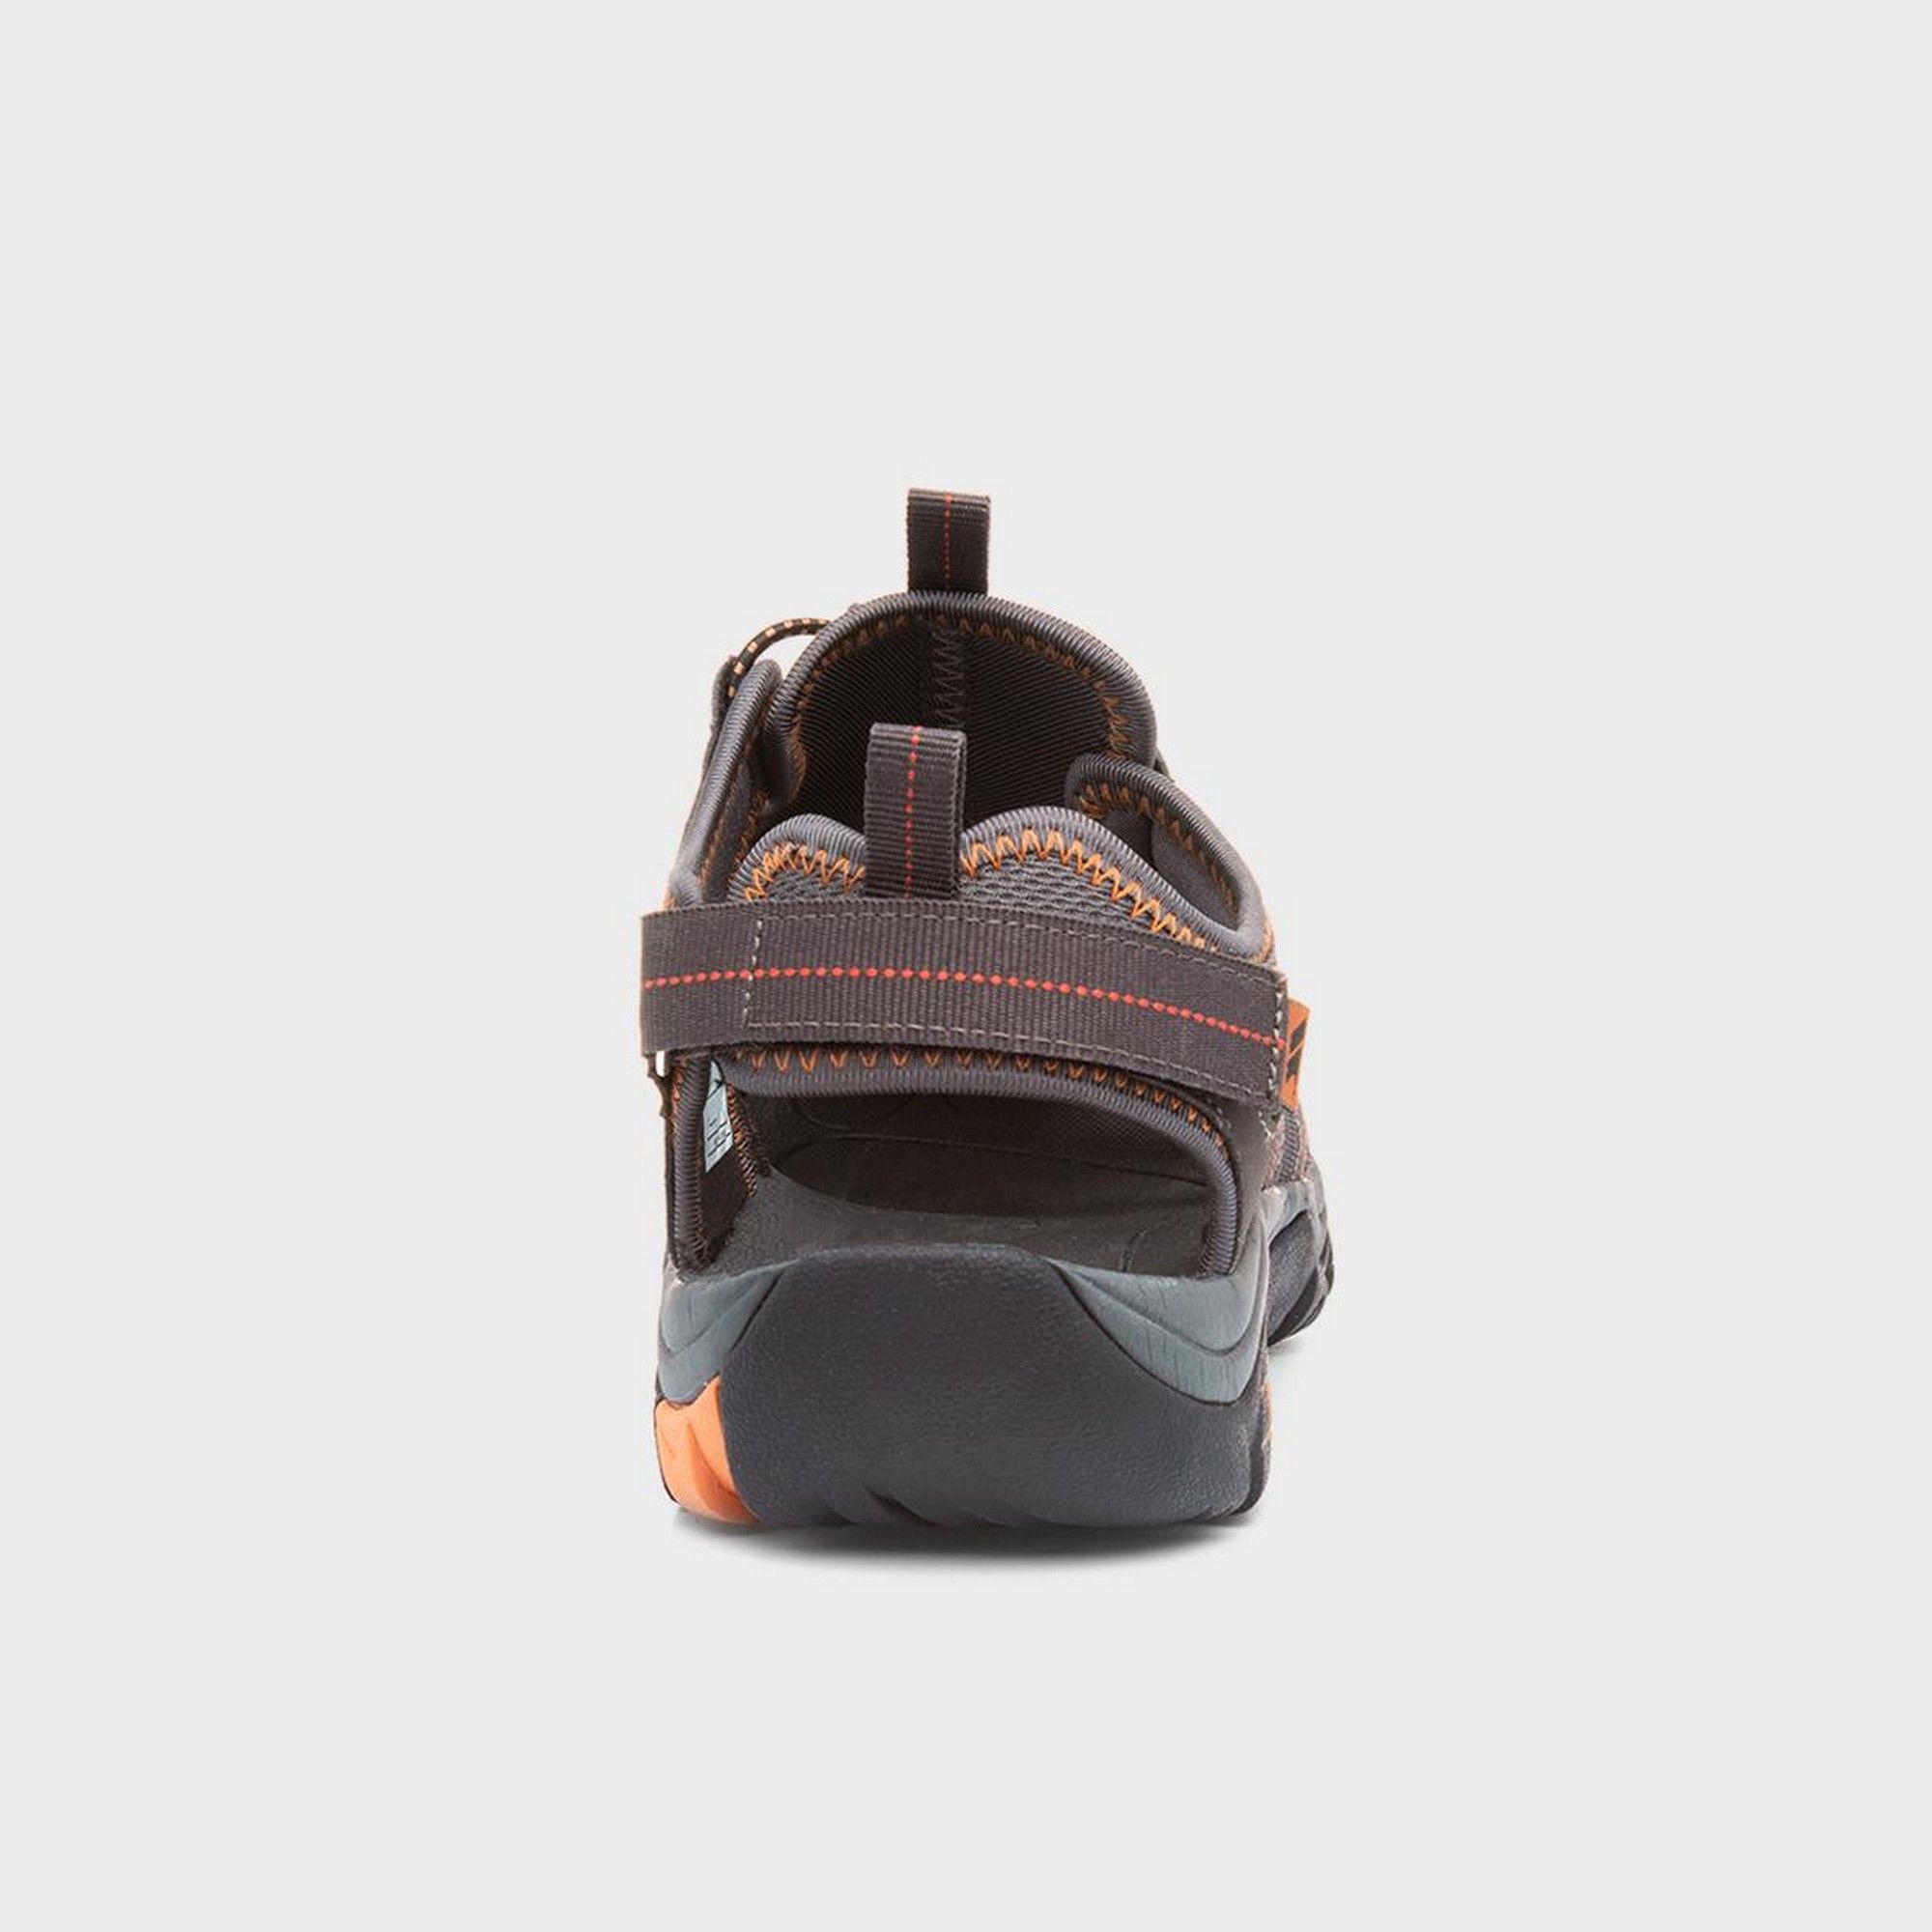 Upper: Textile. Insole: Cushioned. Midsole: Moulded EVA. Outsole: Durable, High Traction, Rubber. Moulded Footbed, Pull Tab. Flat. Cut: Low. Design: Logo. Toe Style: Closed. Fastening: Adjustable Cord, Hook And Loop Strap.